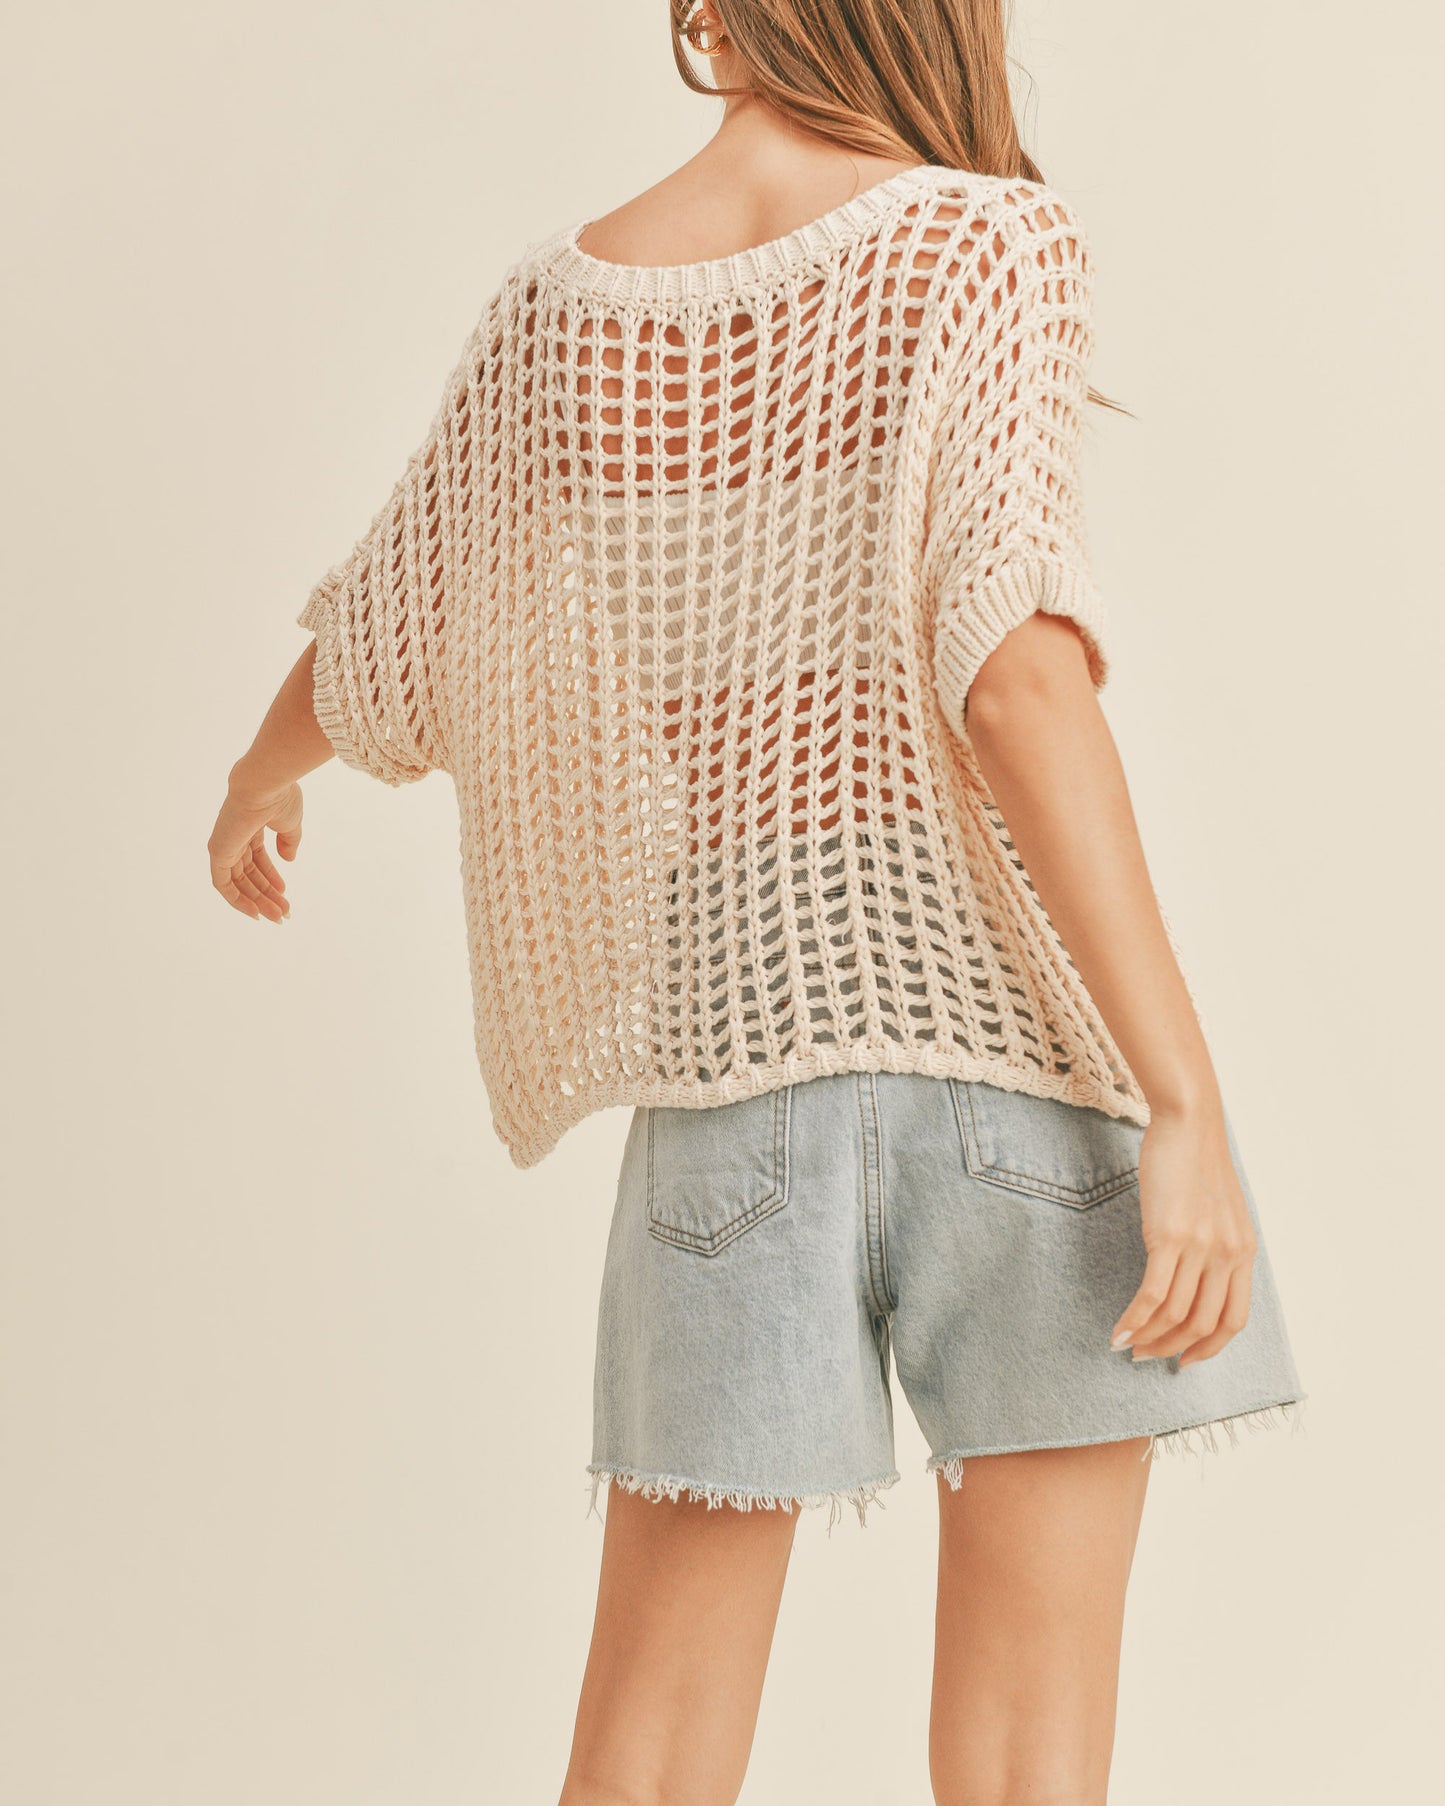 Lucy Net Patterned Knit Top